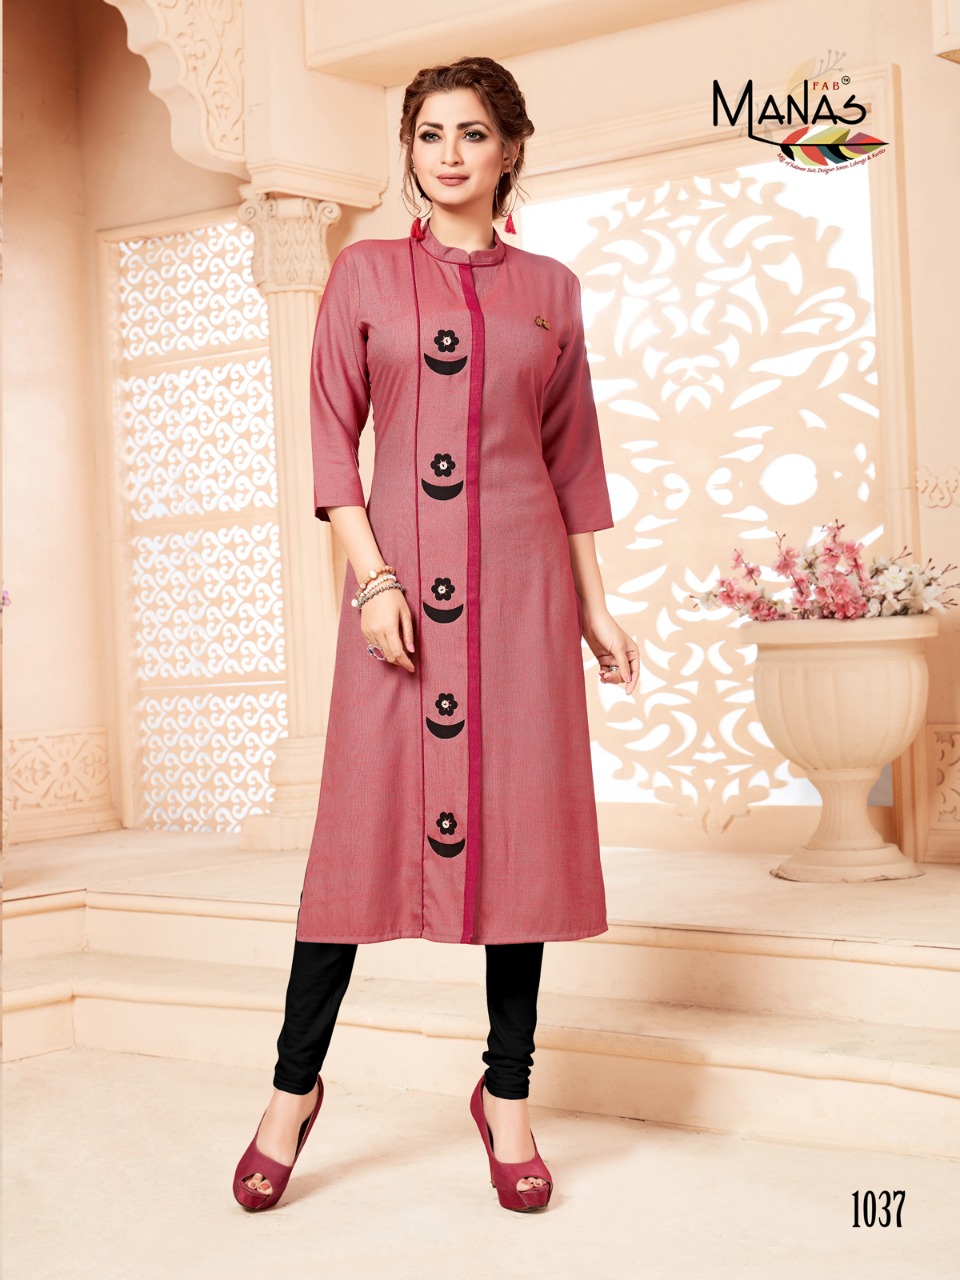 manas priyal vol 5 colorful fancy ready to wear kurtis collection at reasonable rate